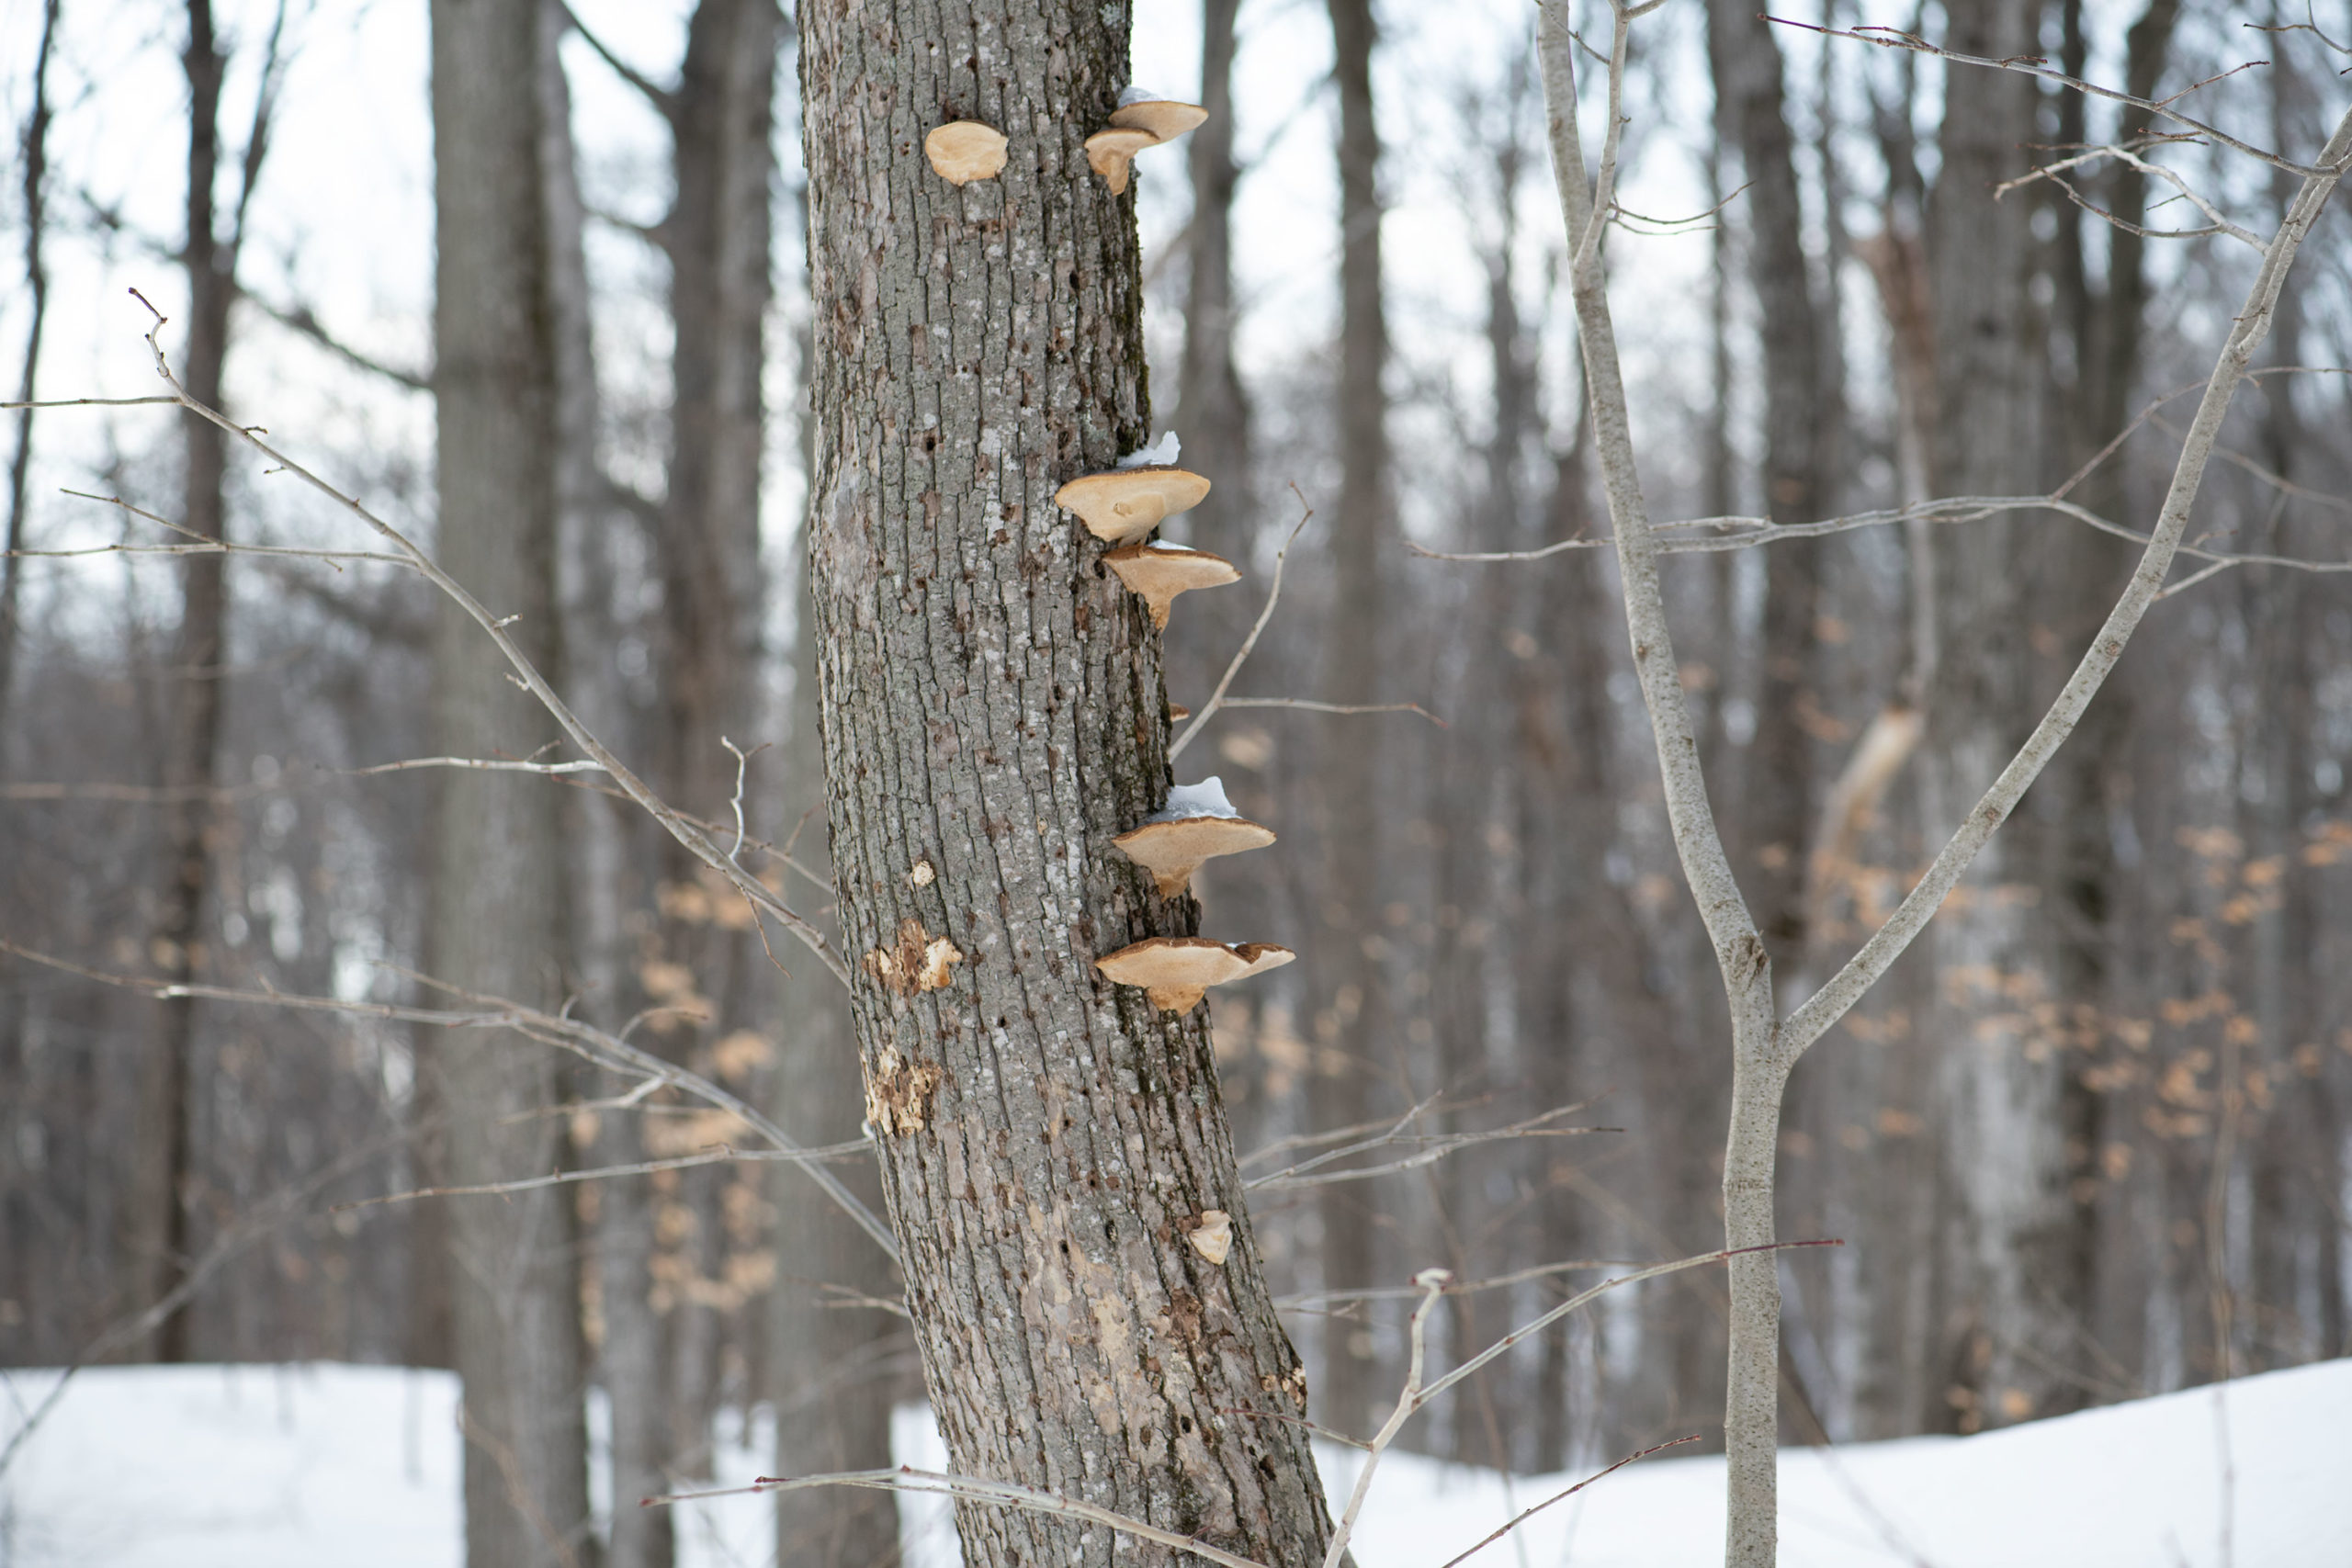 (Before Editing) Photo of tree with mushrooms growing on side, winter